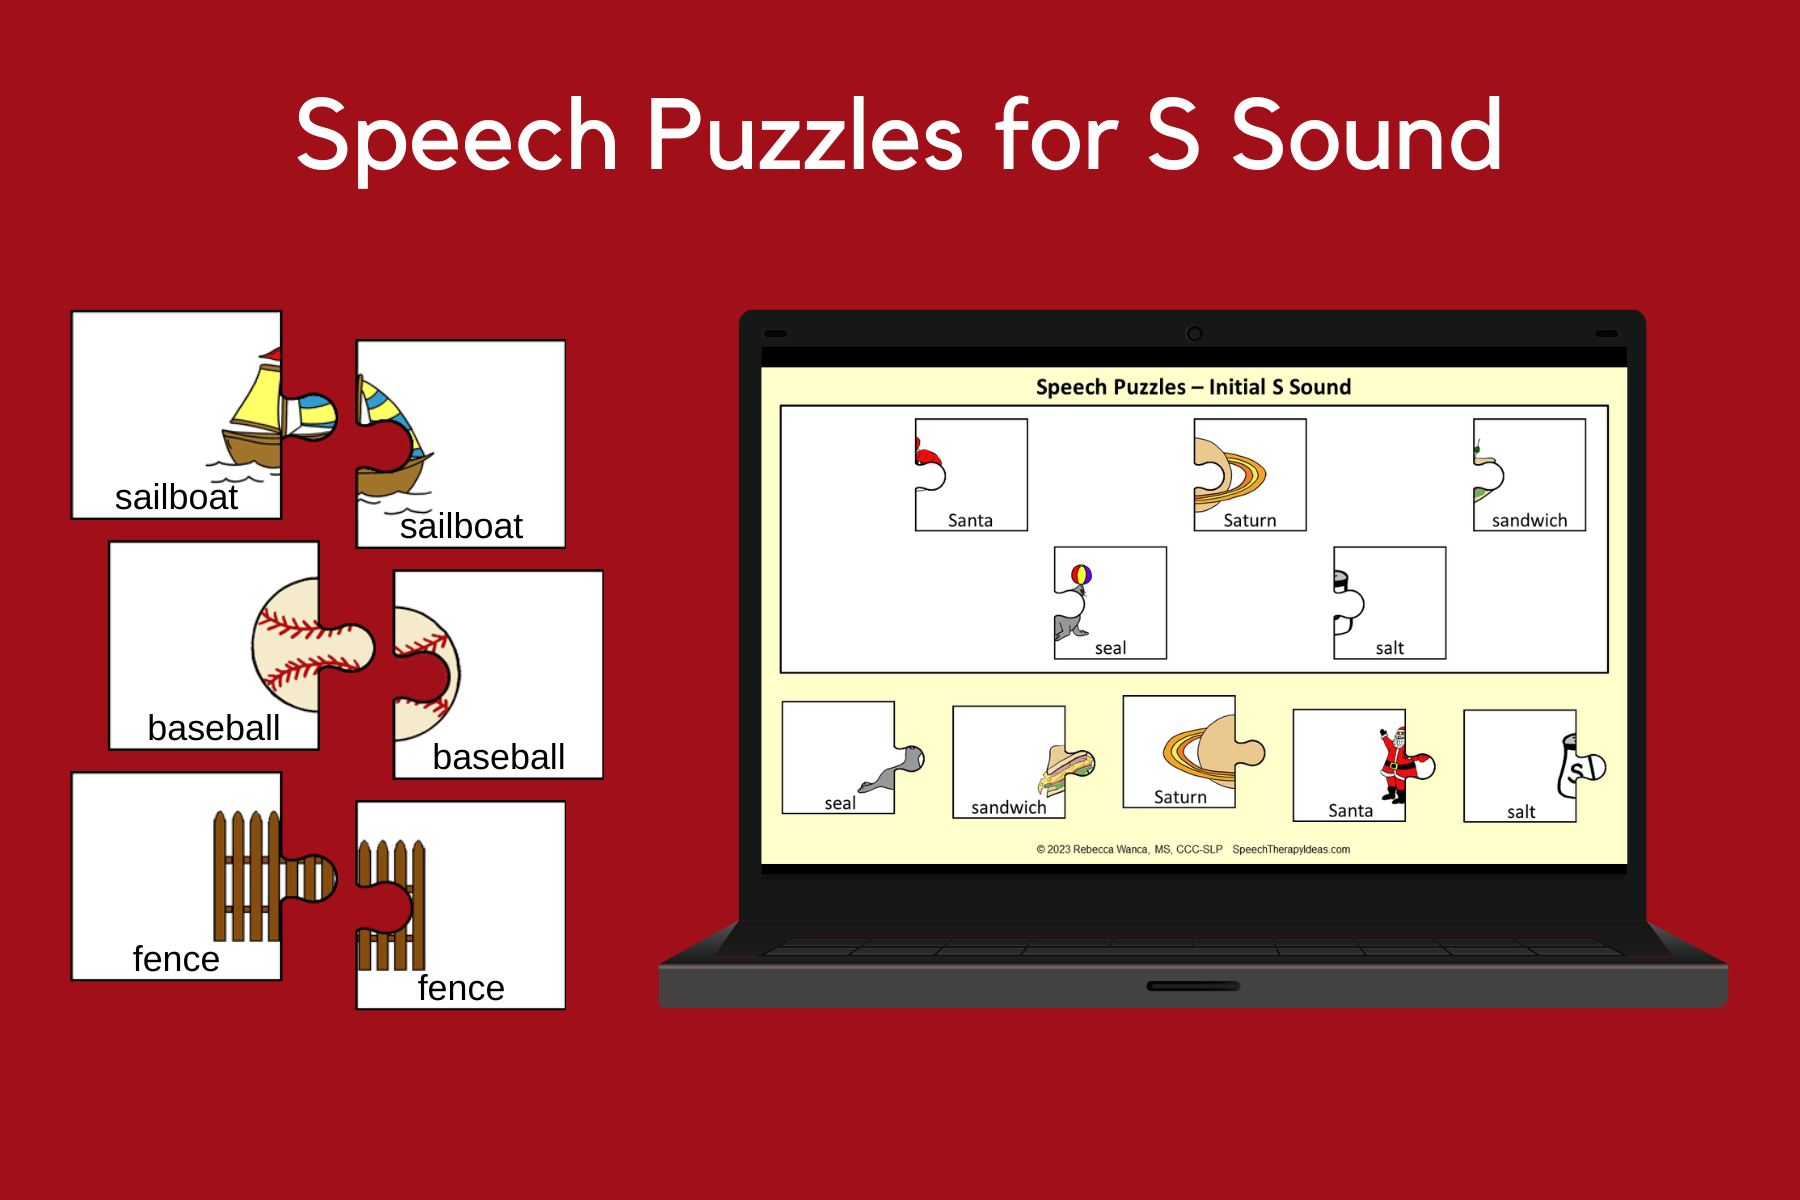 Speech Puzzles for S Sound